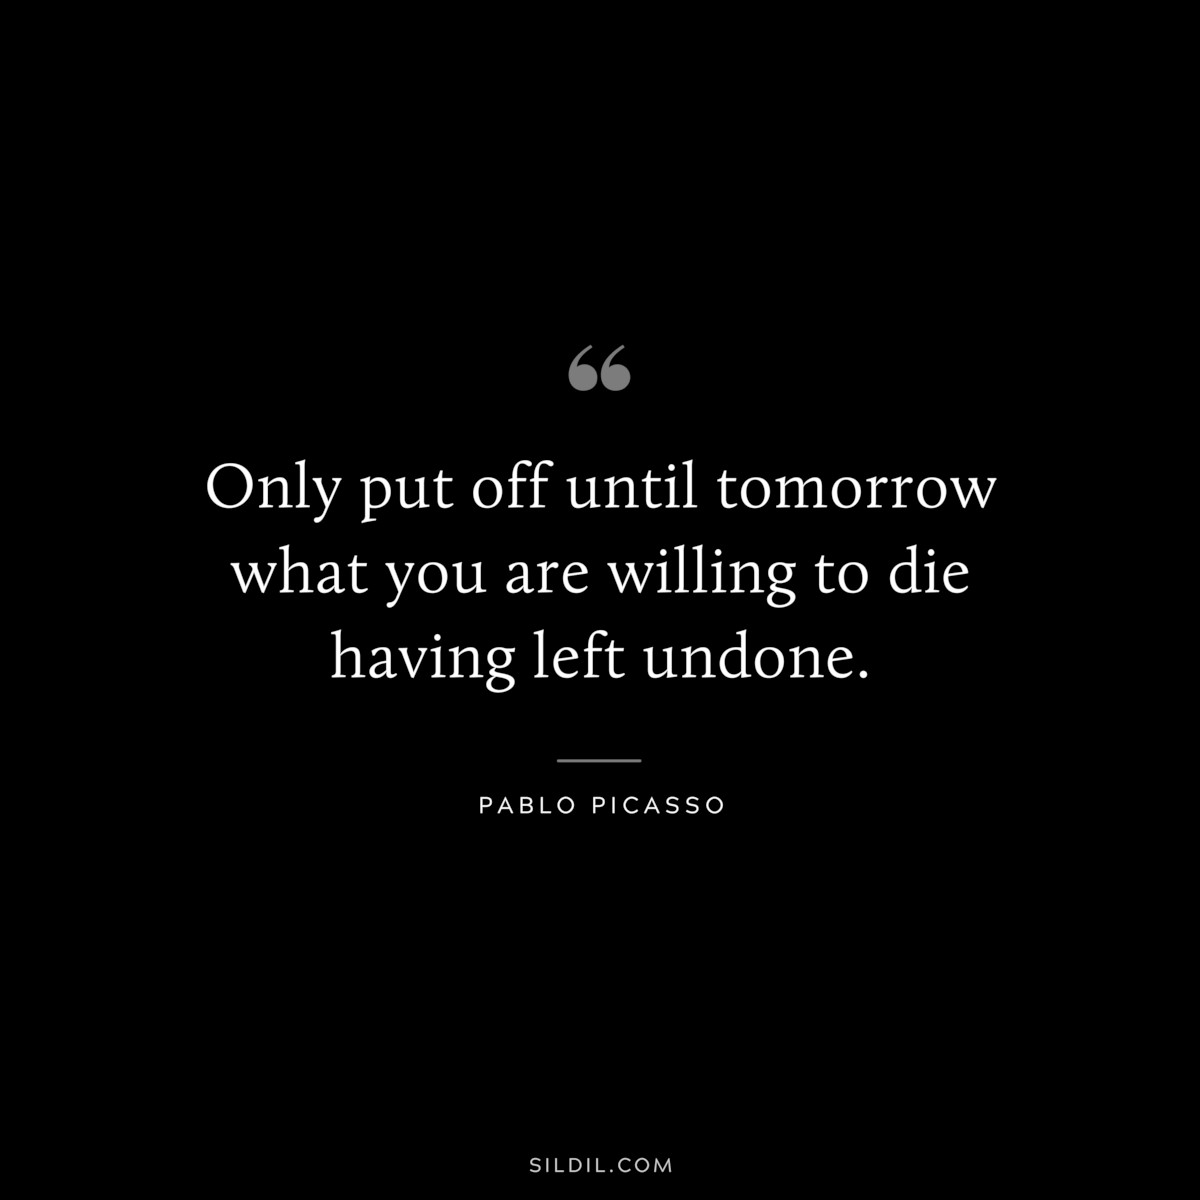 Only put off until tomorrow what you are willing to die having left undone. ― Pablo Picasso